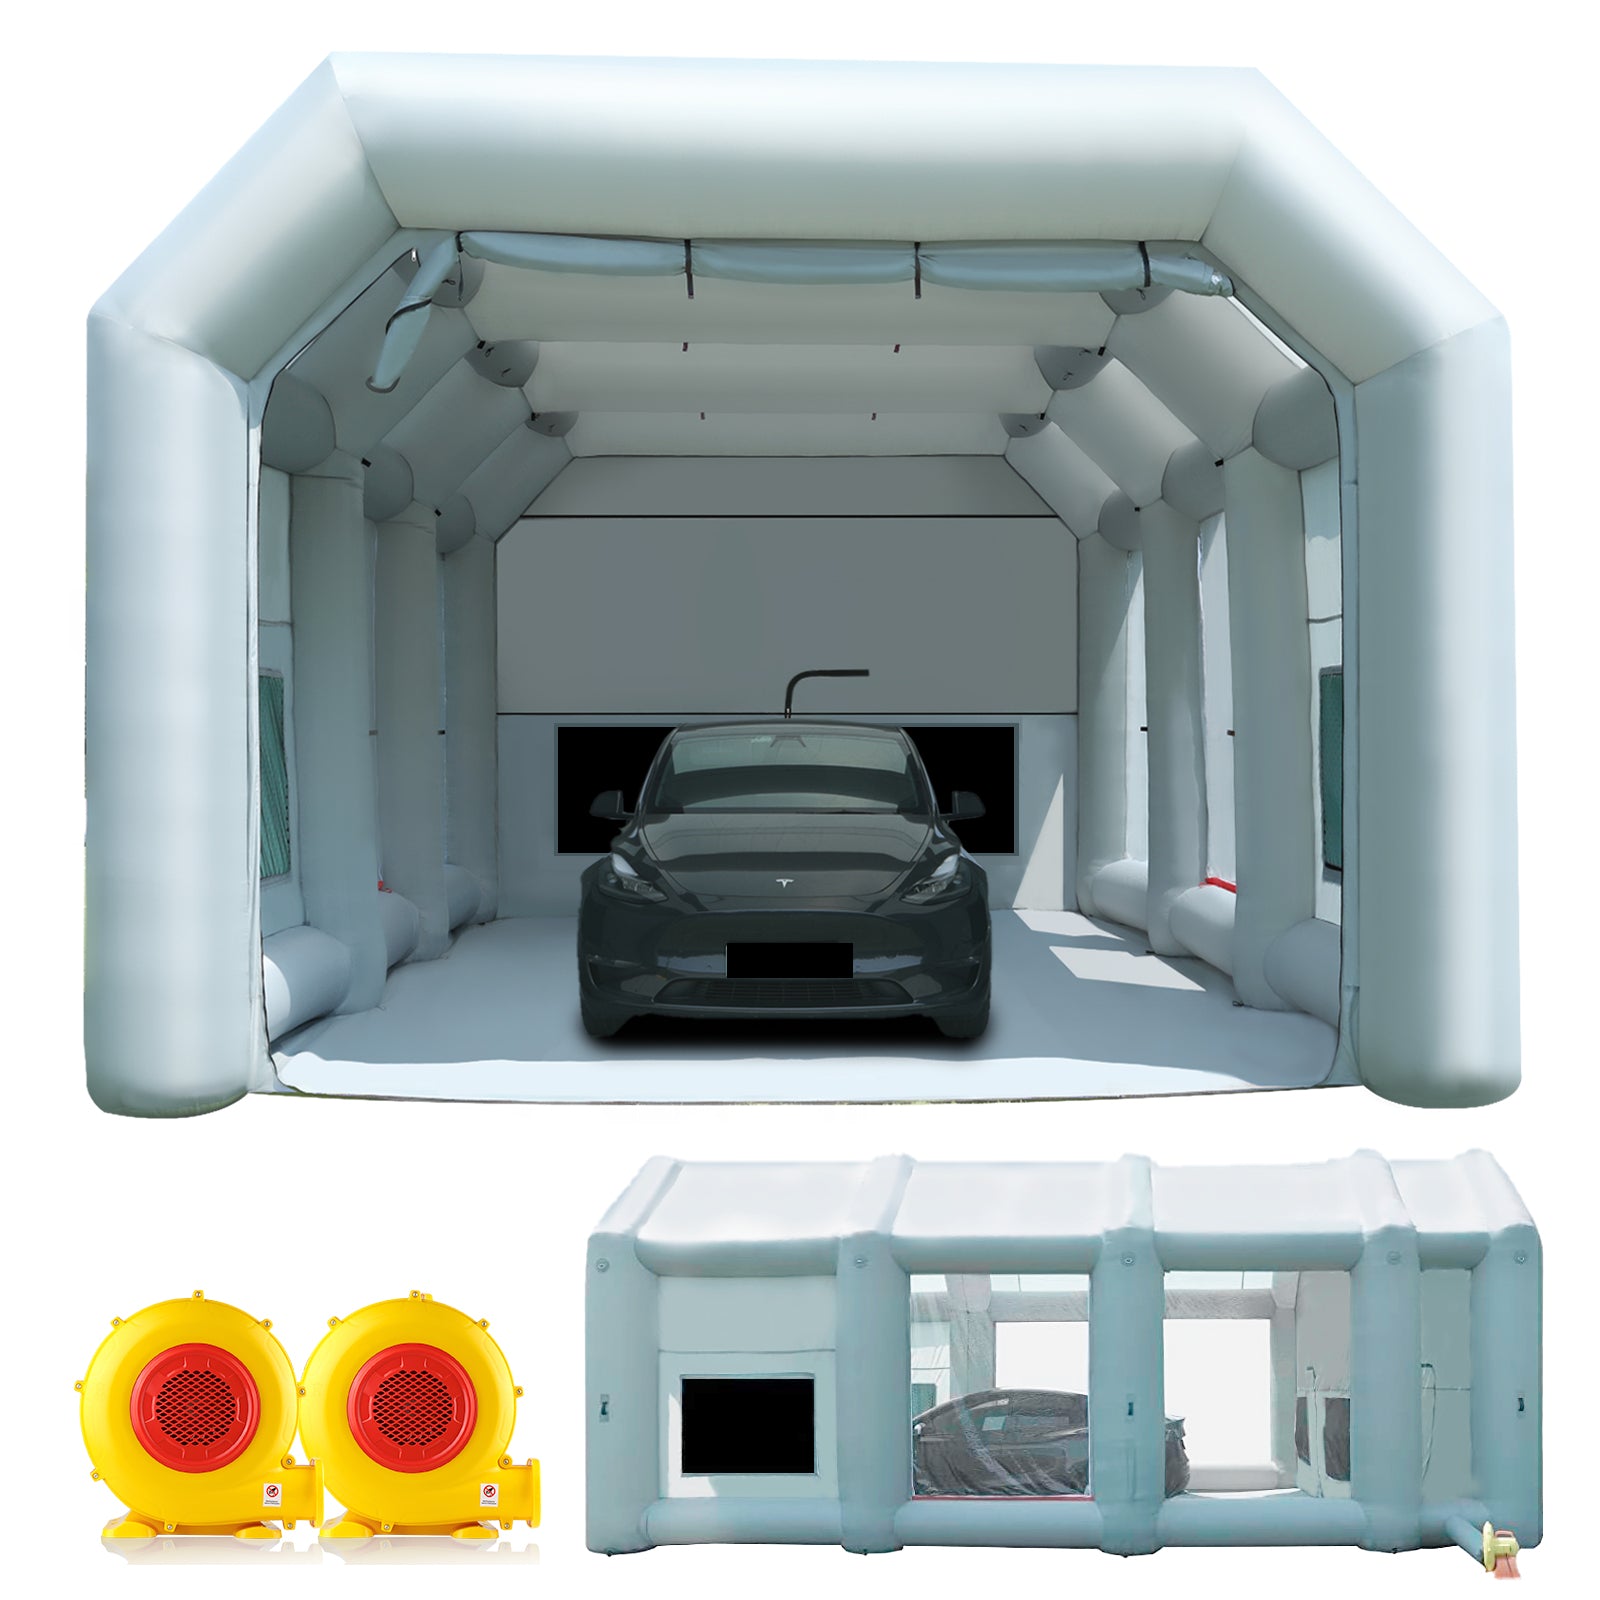 Sewinfla Professional Inflatable Paint Booth 23x20x14.5Ft with Blowers  Upgrade Inflatable Spray Booth More Durable Portable Car Painting Booth Tent  with Air Filter System